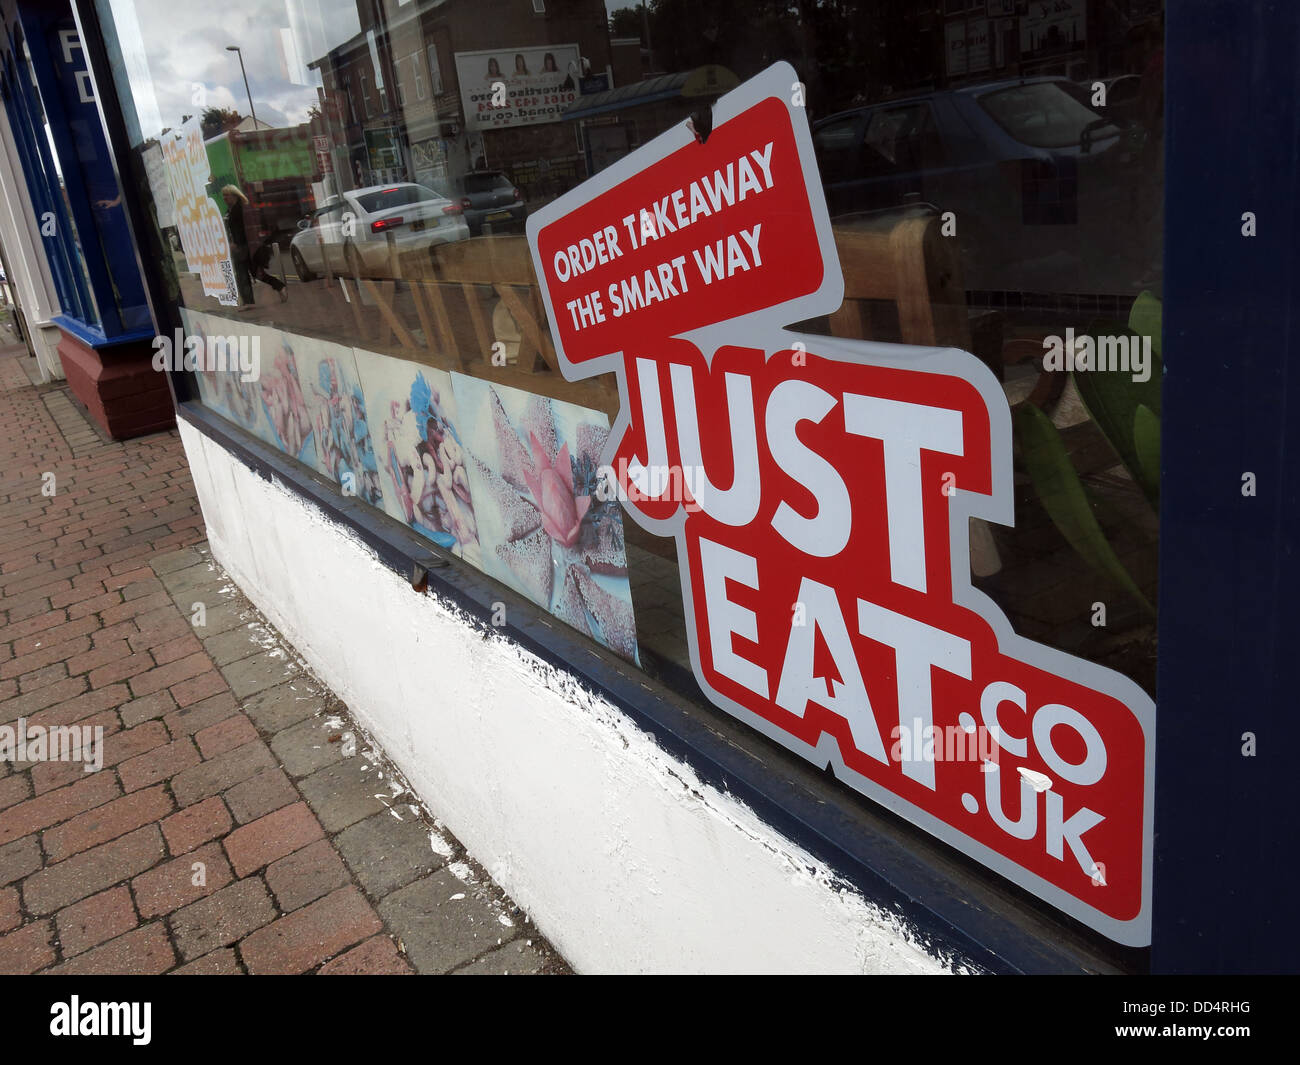 Order Takeaway the Smart Way, Just Eat (JustEat.co.uk) zero hours gig economy delivery service Stock Photo